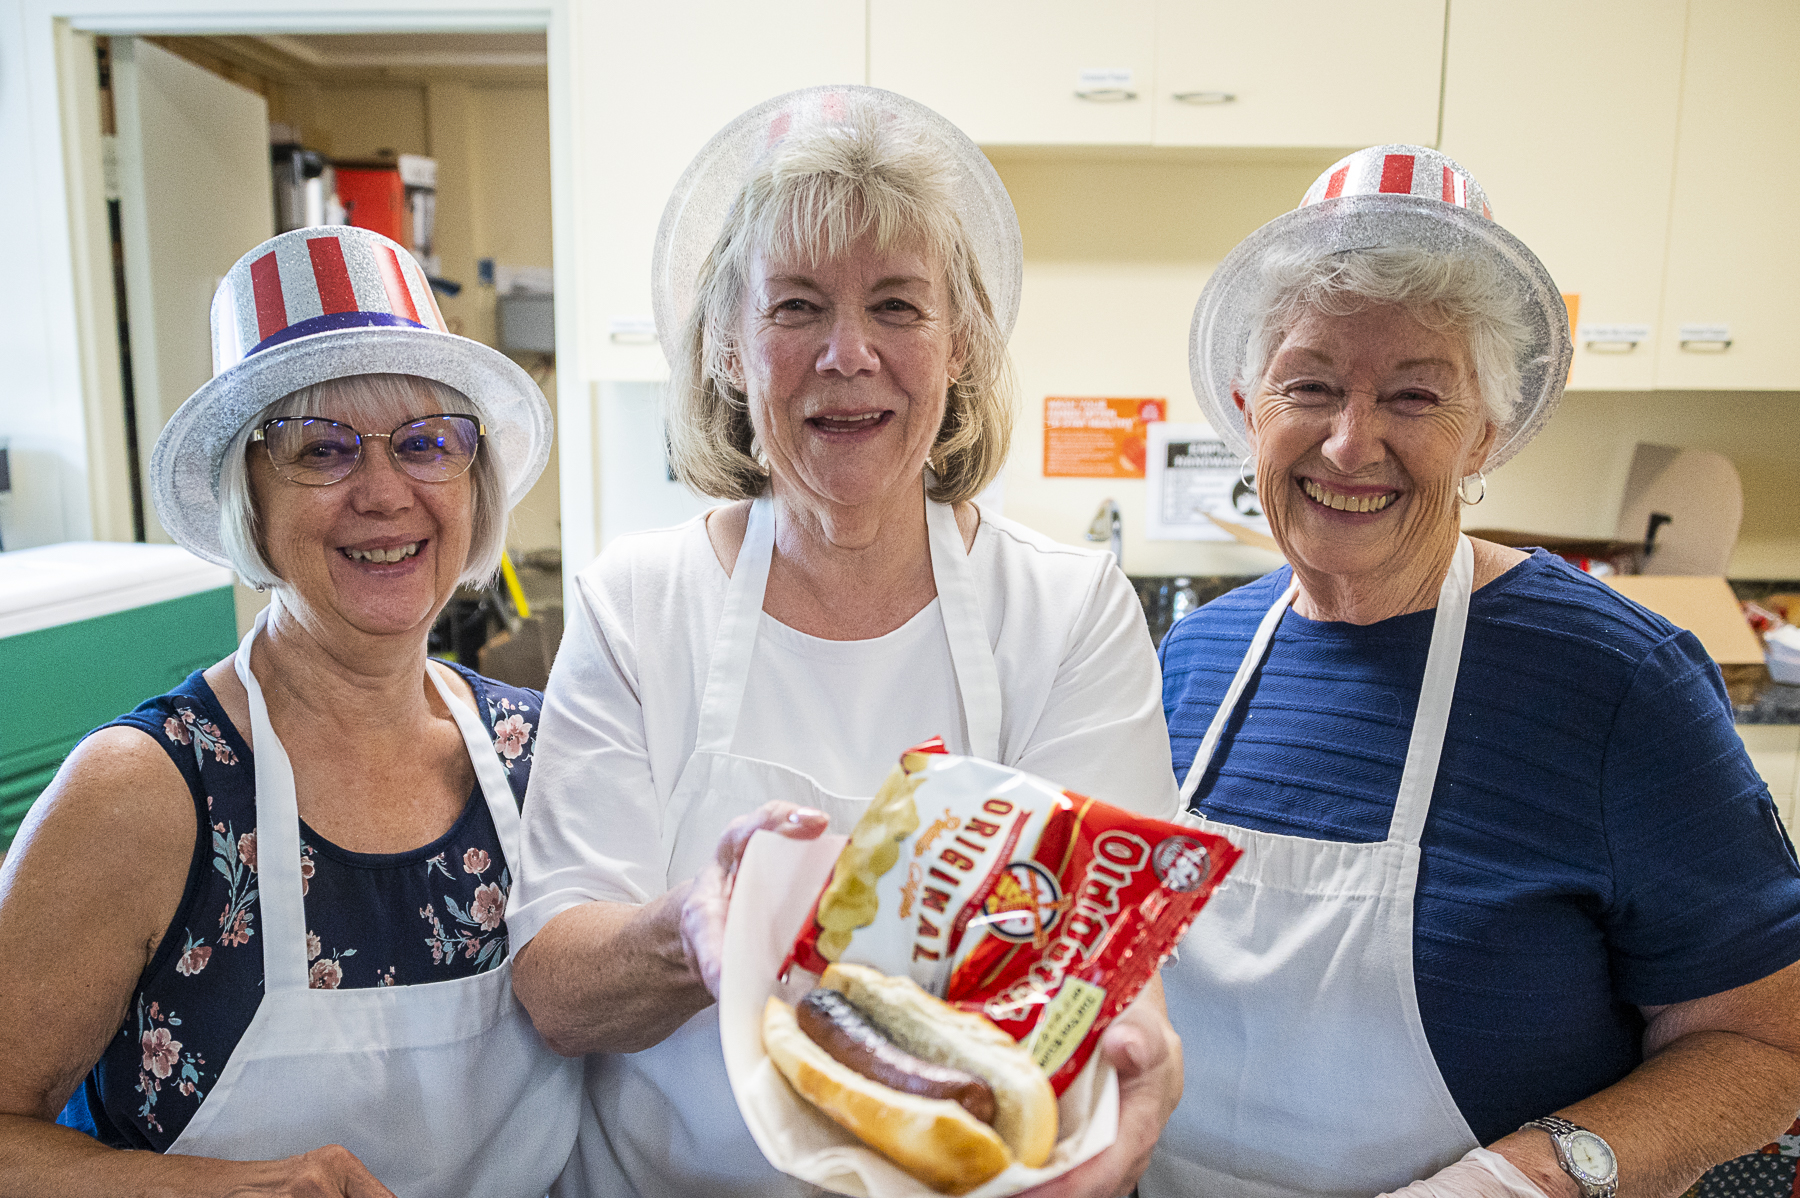 Three women wearing red, white, and blue hats smile while one holds up a plate with a hot dog and chips on it